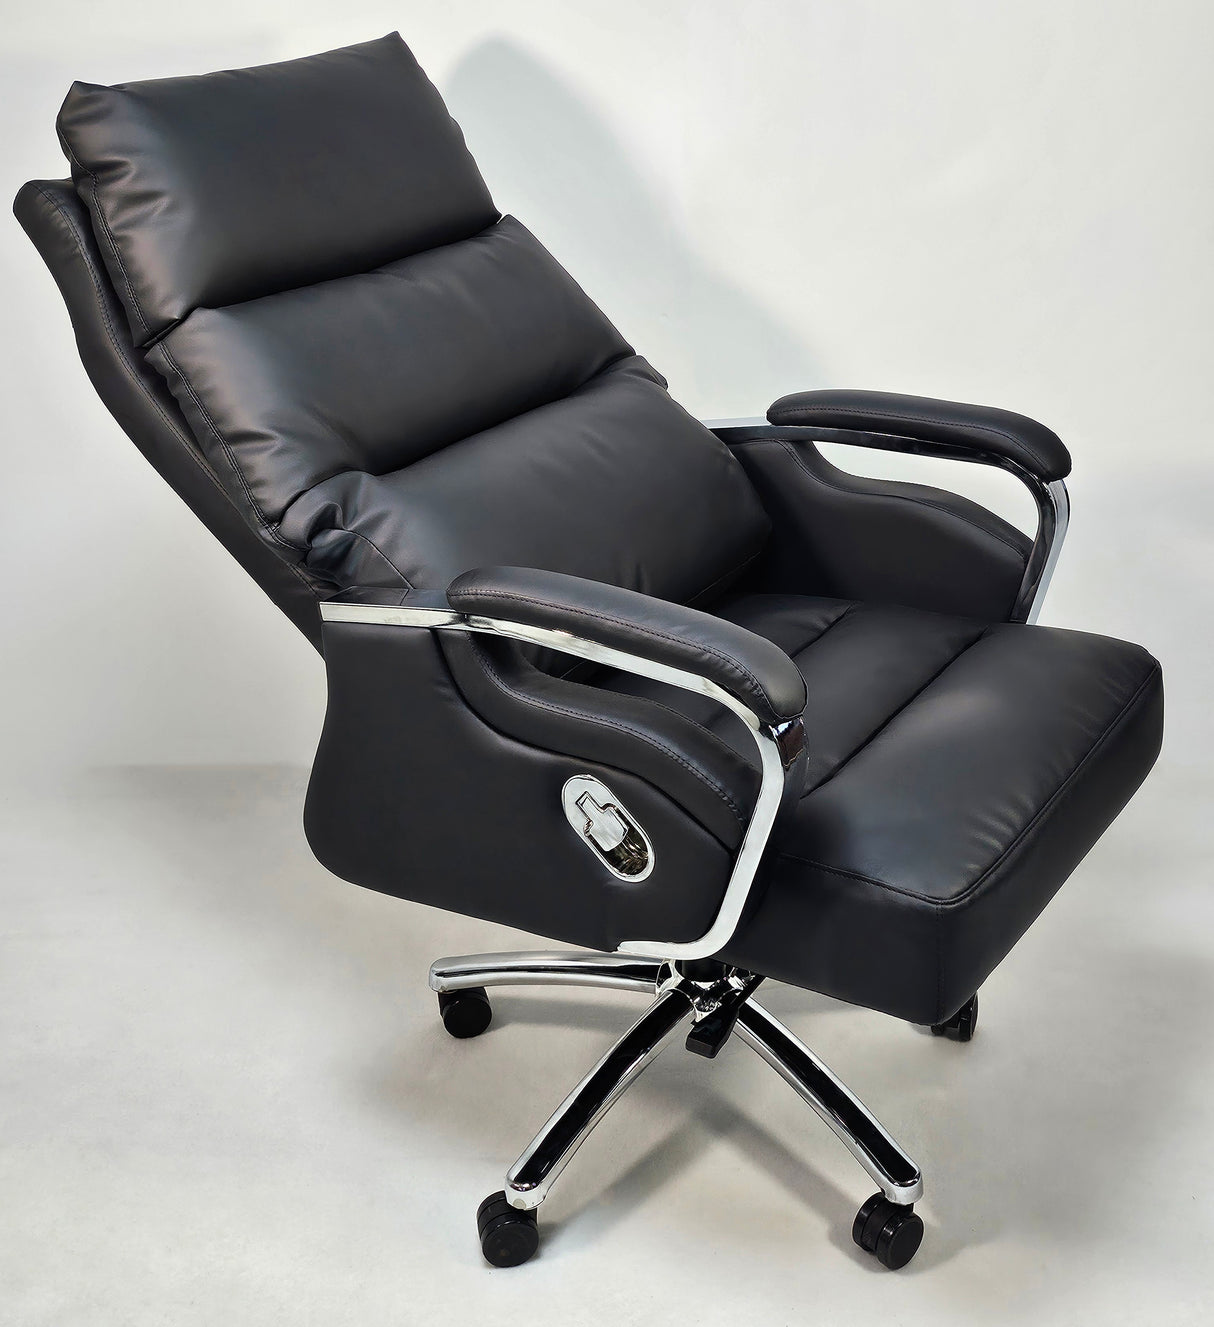 Modern Reclining Black Leather High Back Executive Office Chair - HB-263A